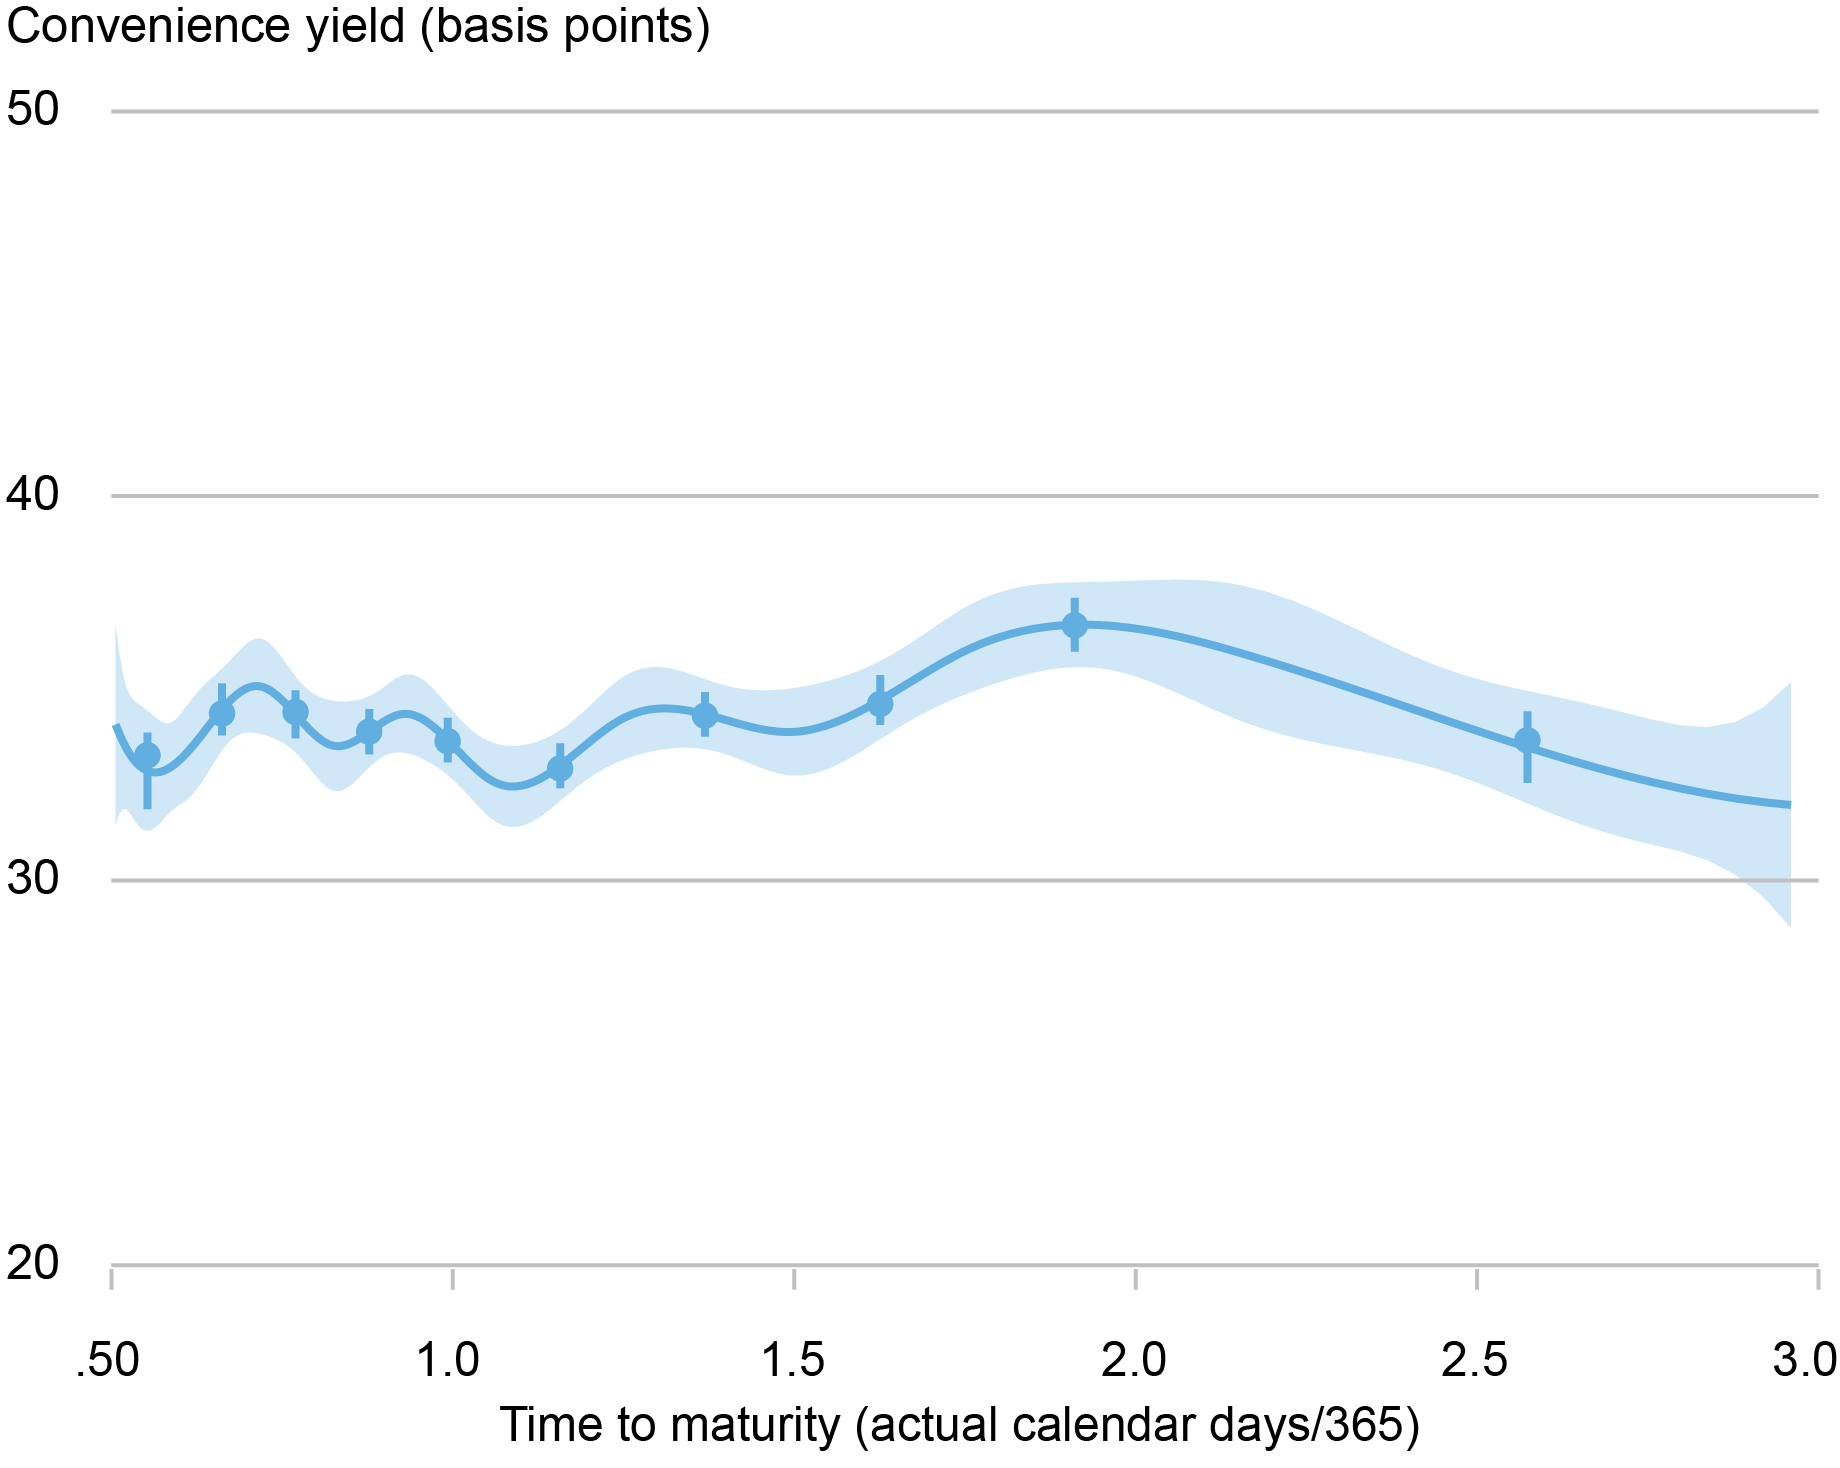 Liberty Street Economics line chart plots the nonparametric binned regression of convenience yield (in basis points) onto time-to-maturity using the binsreg package to show the average term structure of convenience yields is almost flat across maturities out to three years.  